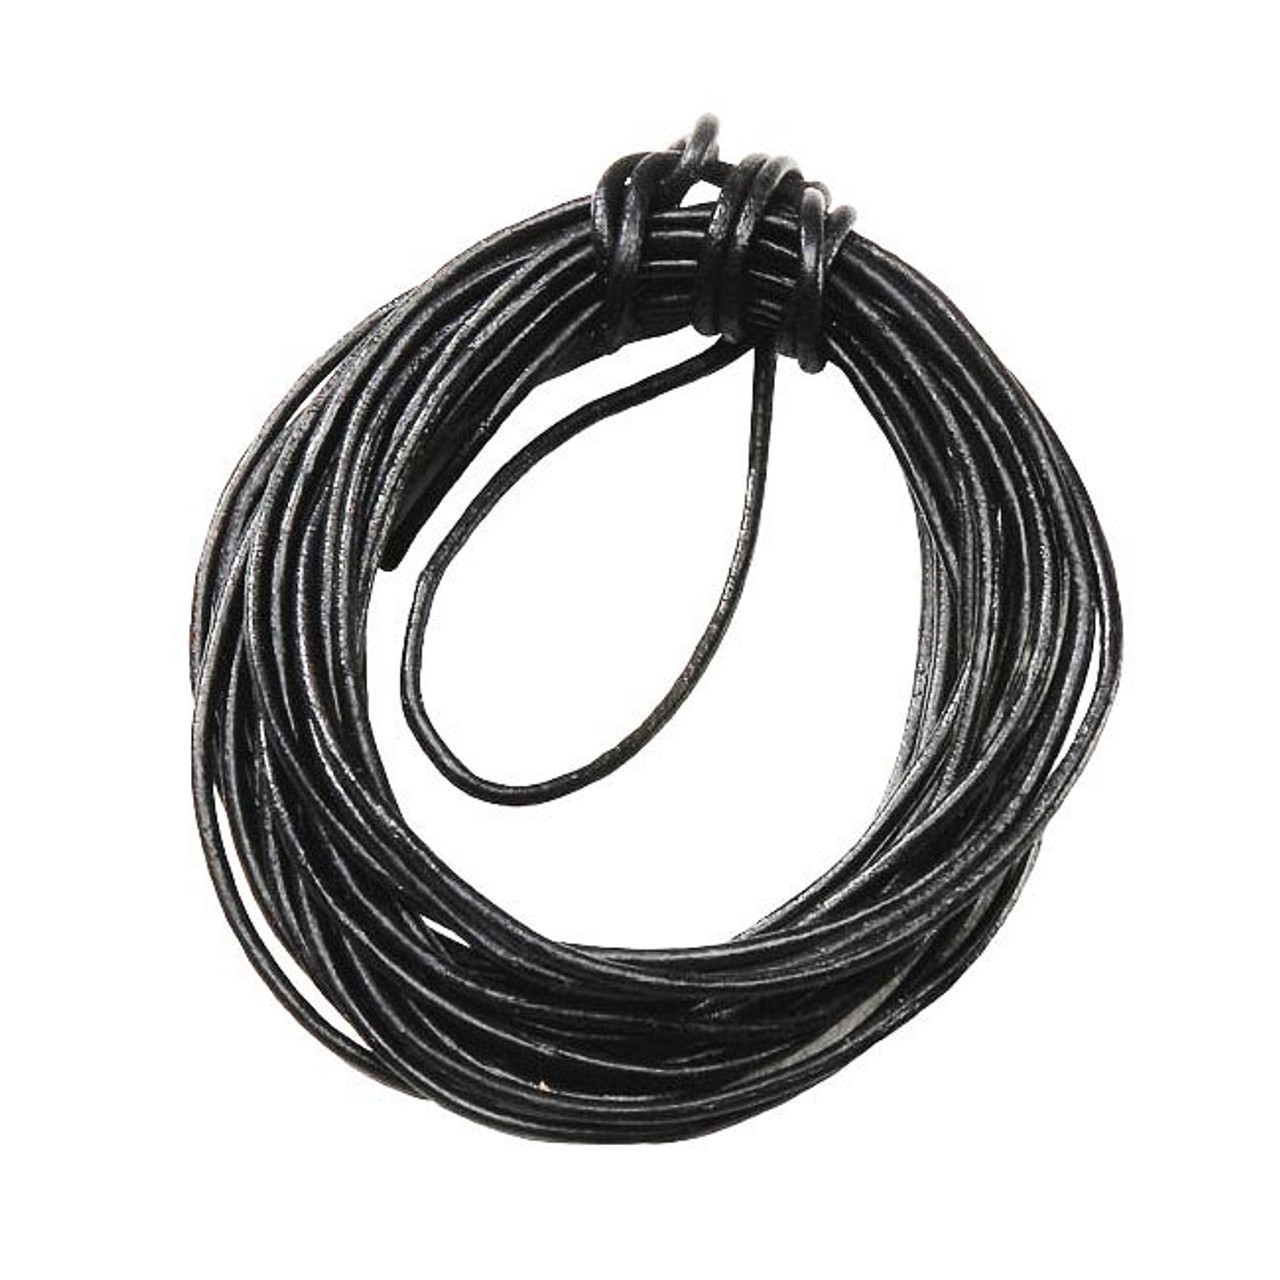 1mm Black Leather Cord - 3 Yards